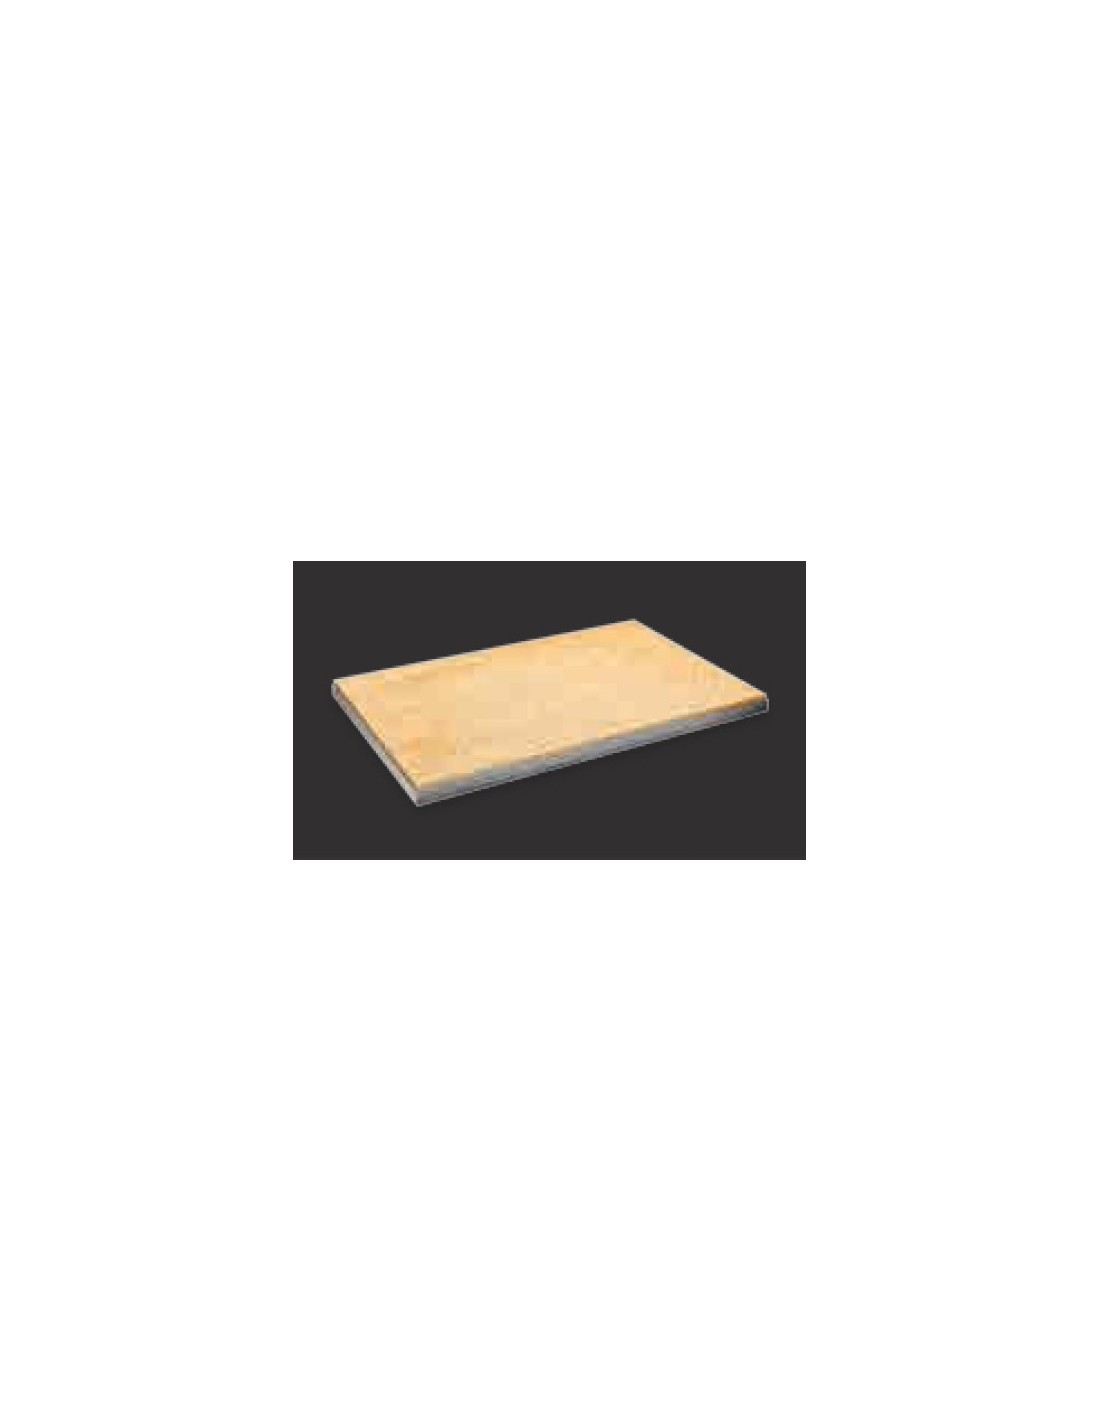 Refractory stone plate - Dimensions 43.5 x 35 x 1.5 h